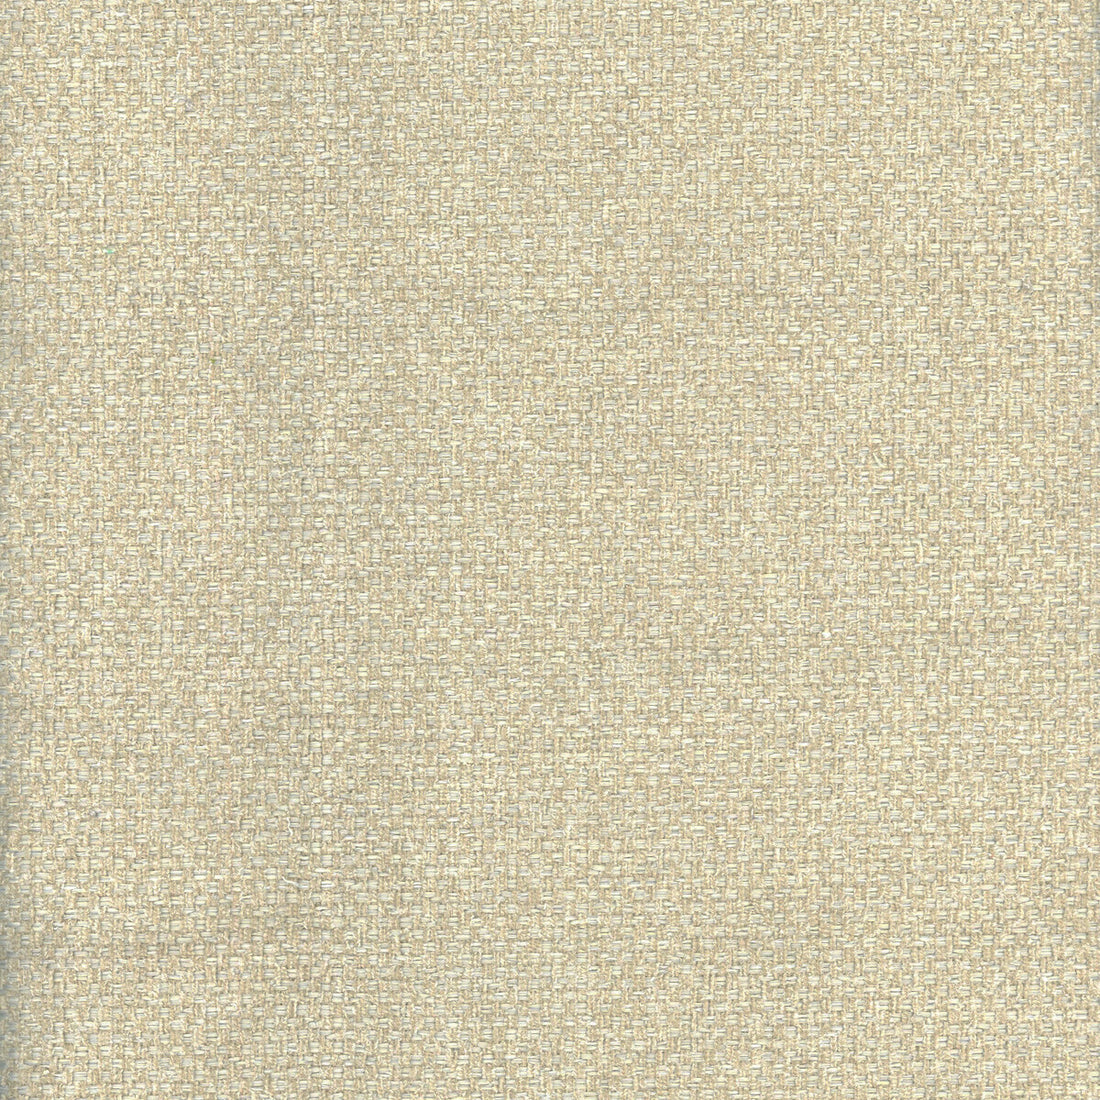 Yosemite fabric in stone color - pattern AM100332.1.0 - by Kravet Couture in the Andrew Martin Canyon collection